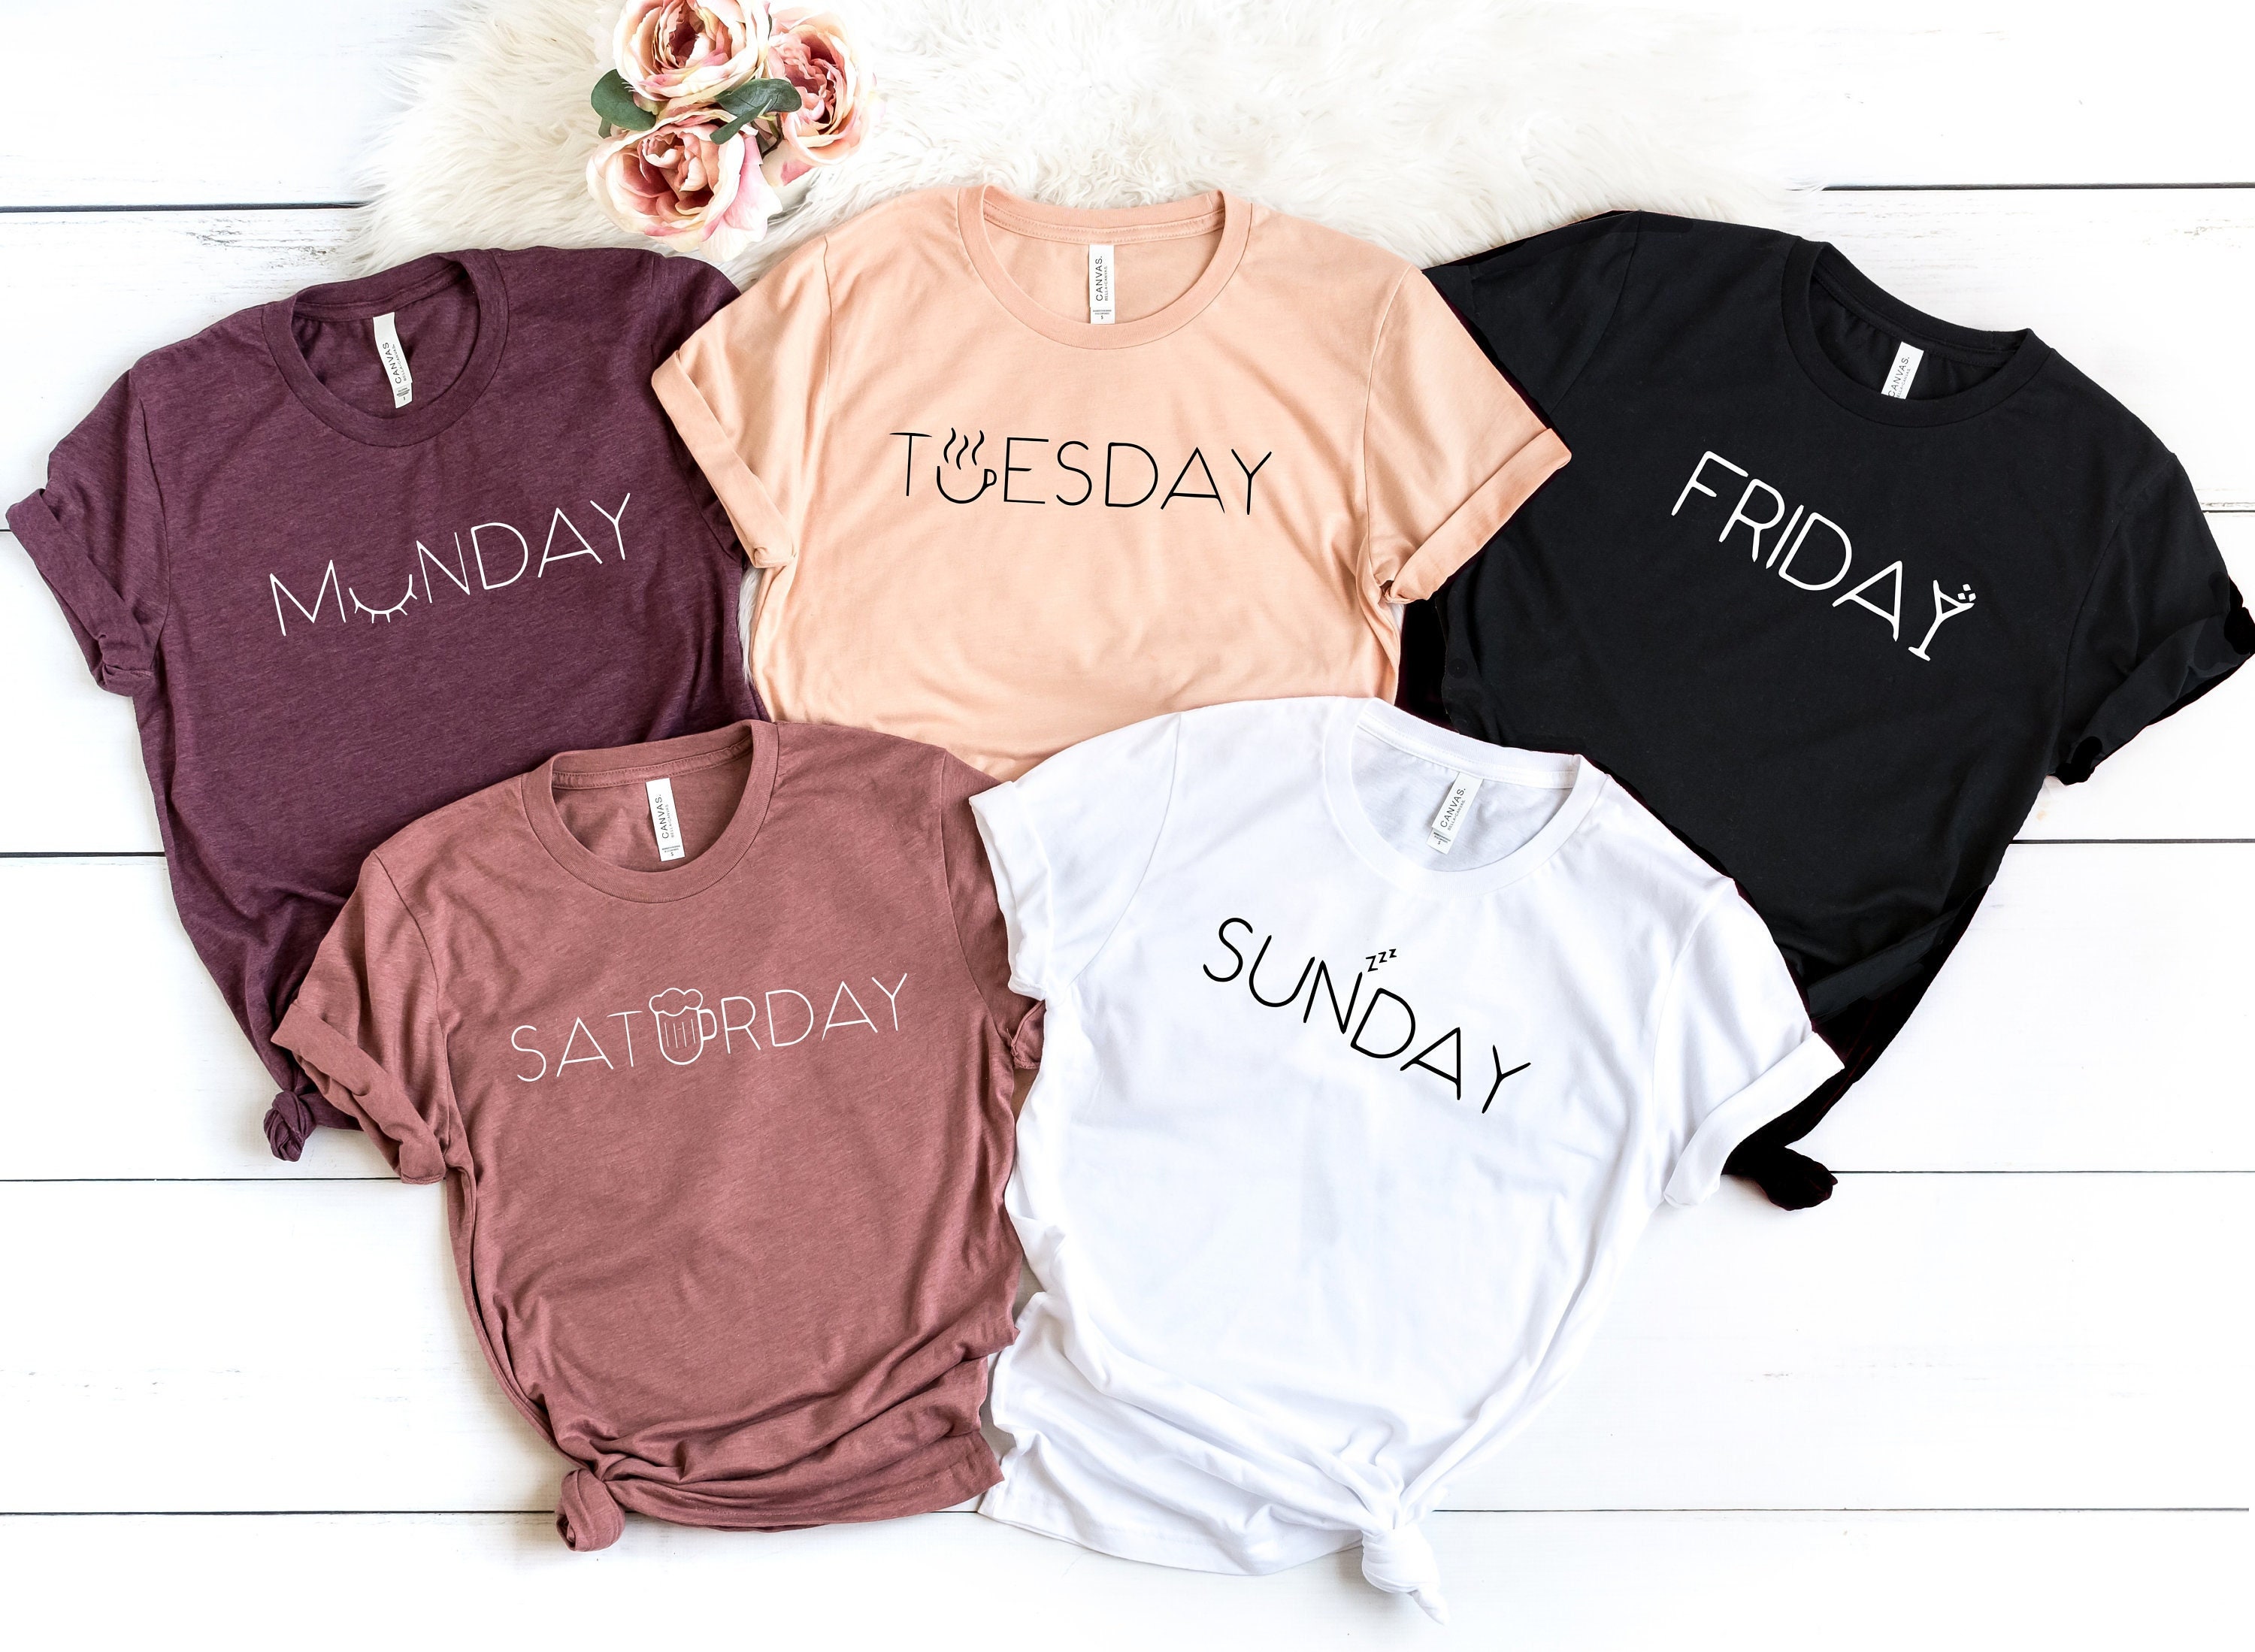  Wednesday Day of the Week Tee in Spanish-Miércoles T-Shirt :  Clothing, Shoes & Jewelry